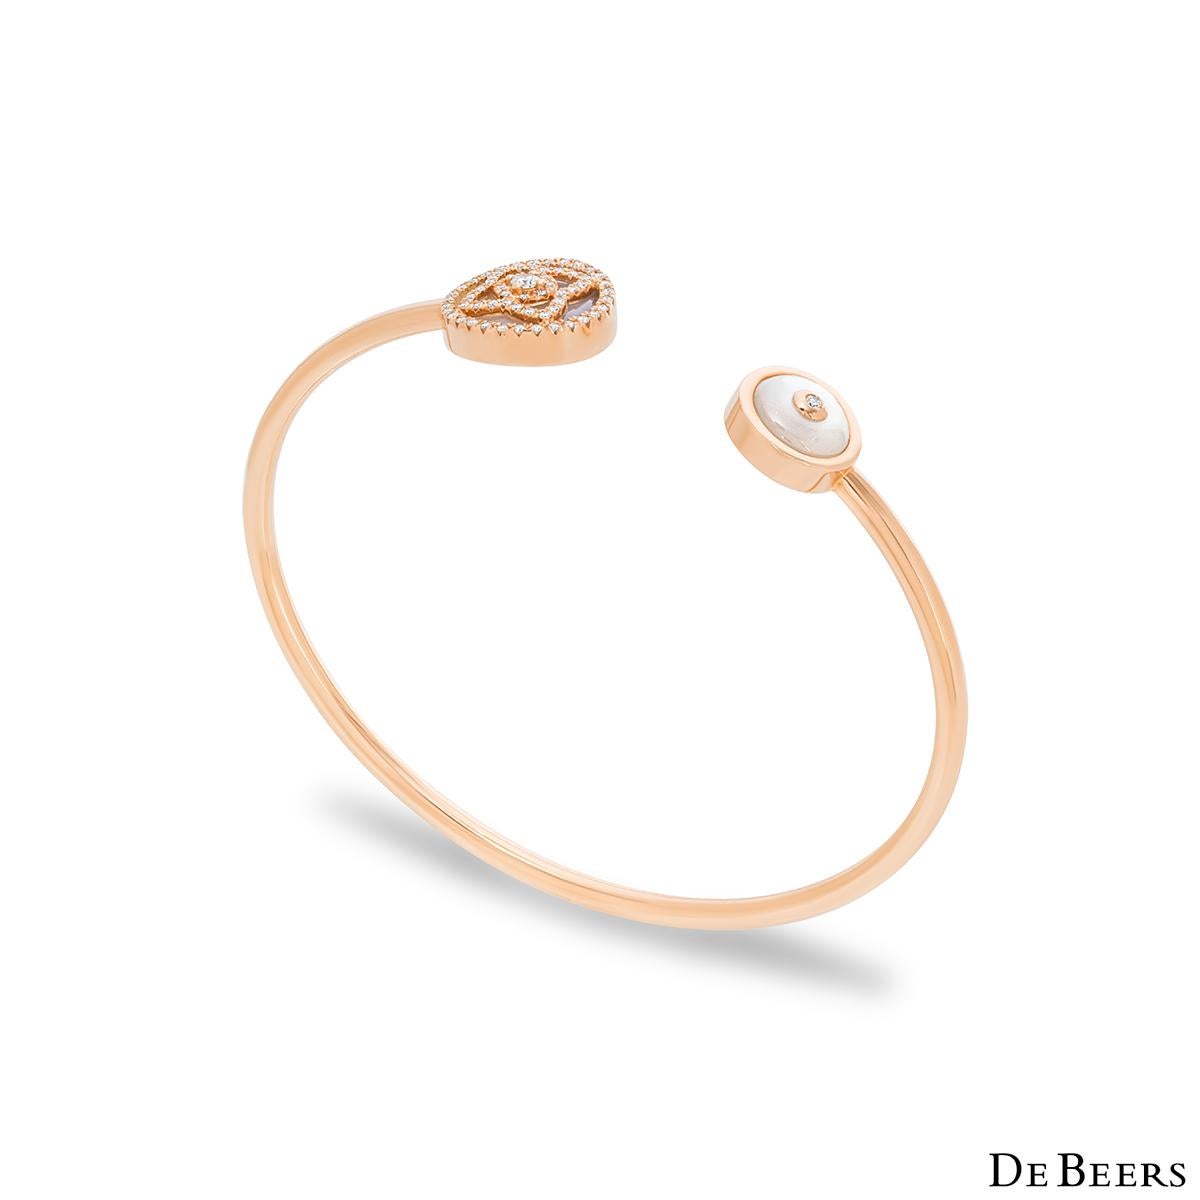 An elegant 18k rose gold mother of pearl and diamond Enchanted Lotus bracelet by De Beers. The cuff style bracelet features the iconic Enchanted Lotus motif on one end, pave set over a white mother of pearl inlay with 63 round brilliant cut